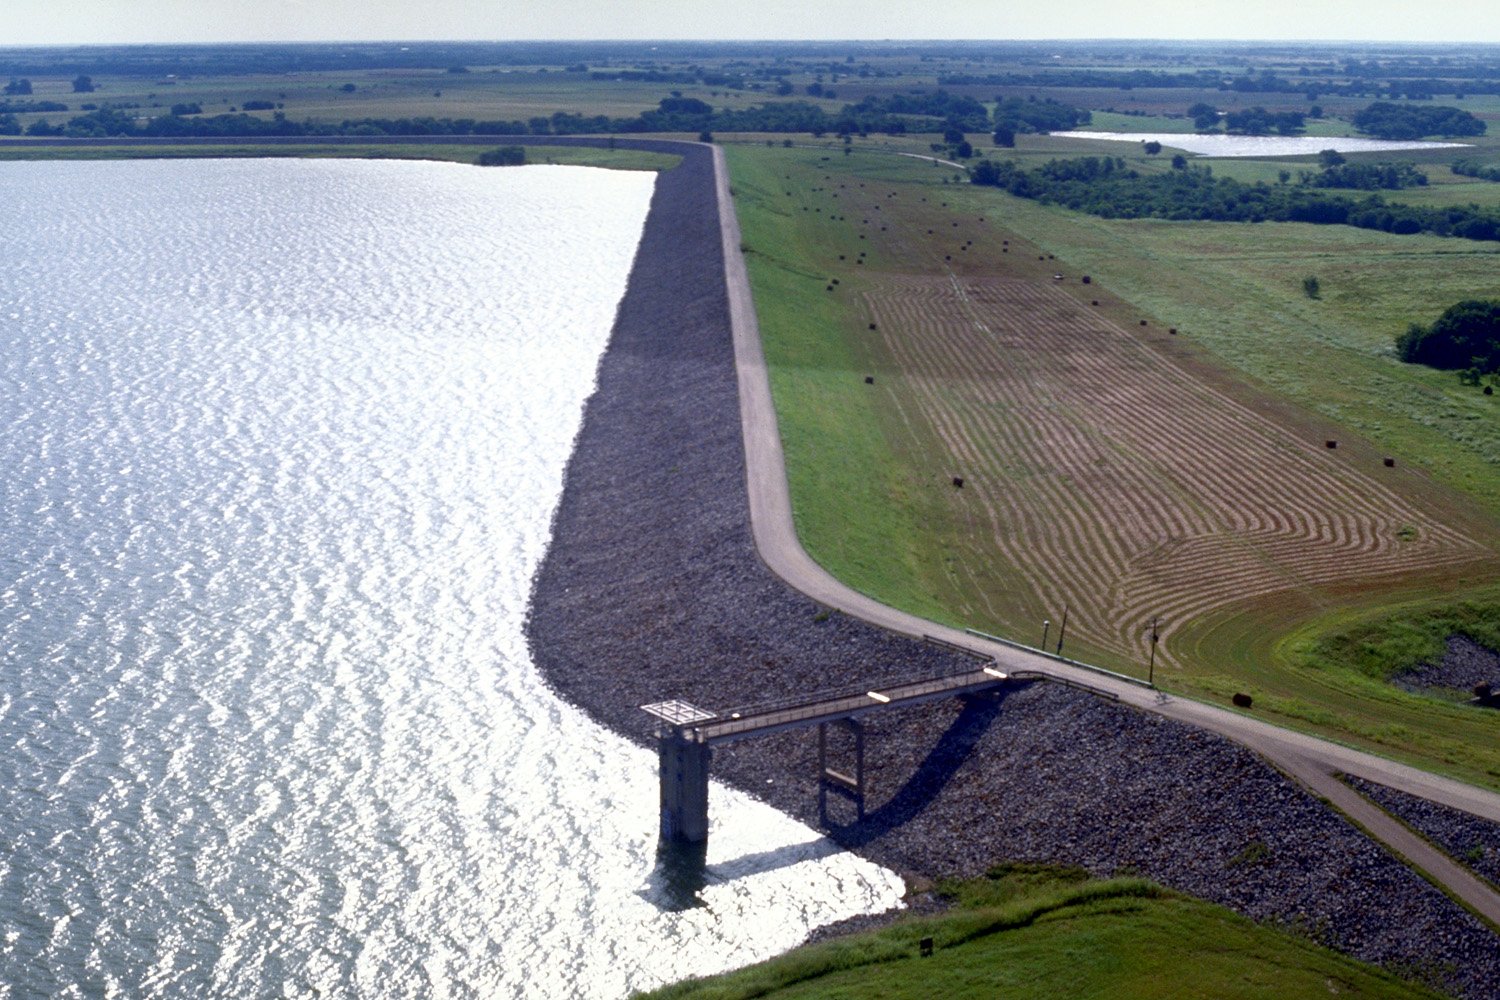 Bardwell Dam was completed in 1965